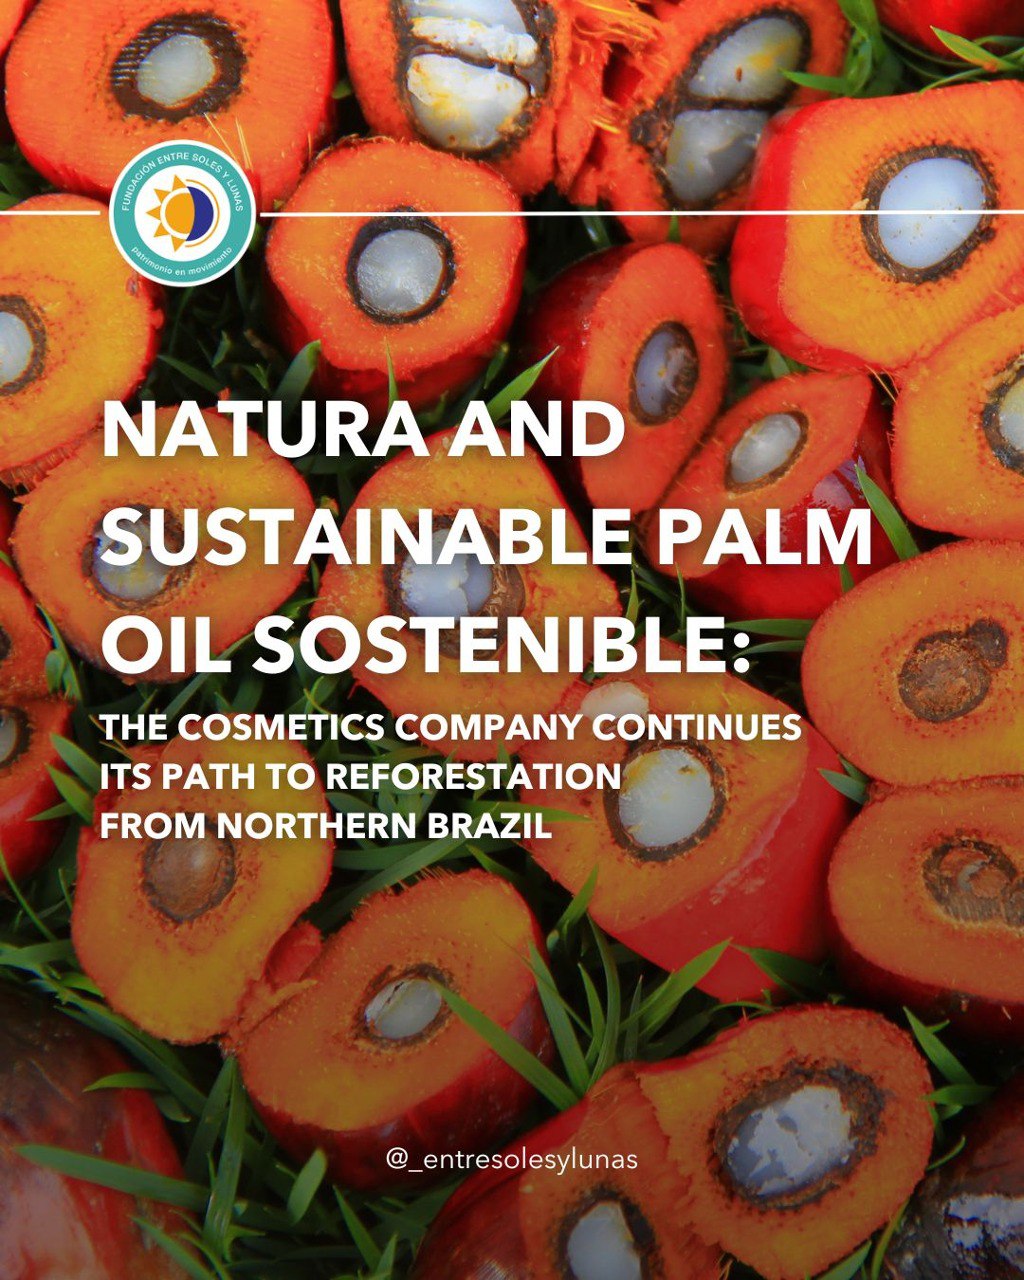 Natura Company expands its sustainable palm cultivation project in Northern Brazil